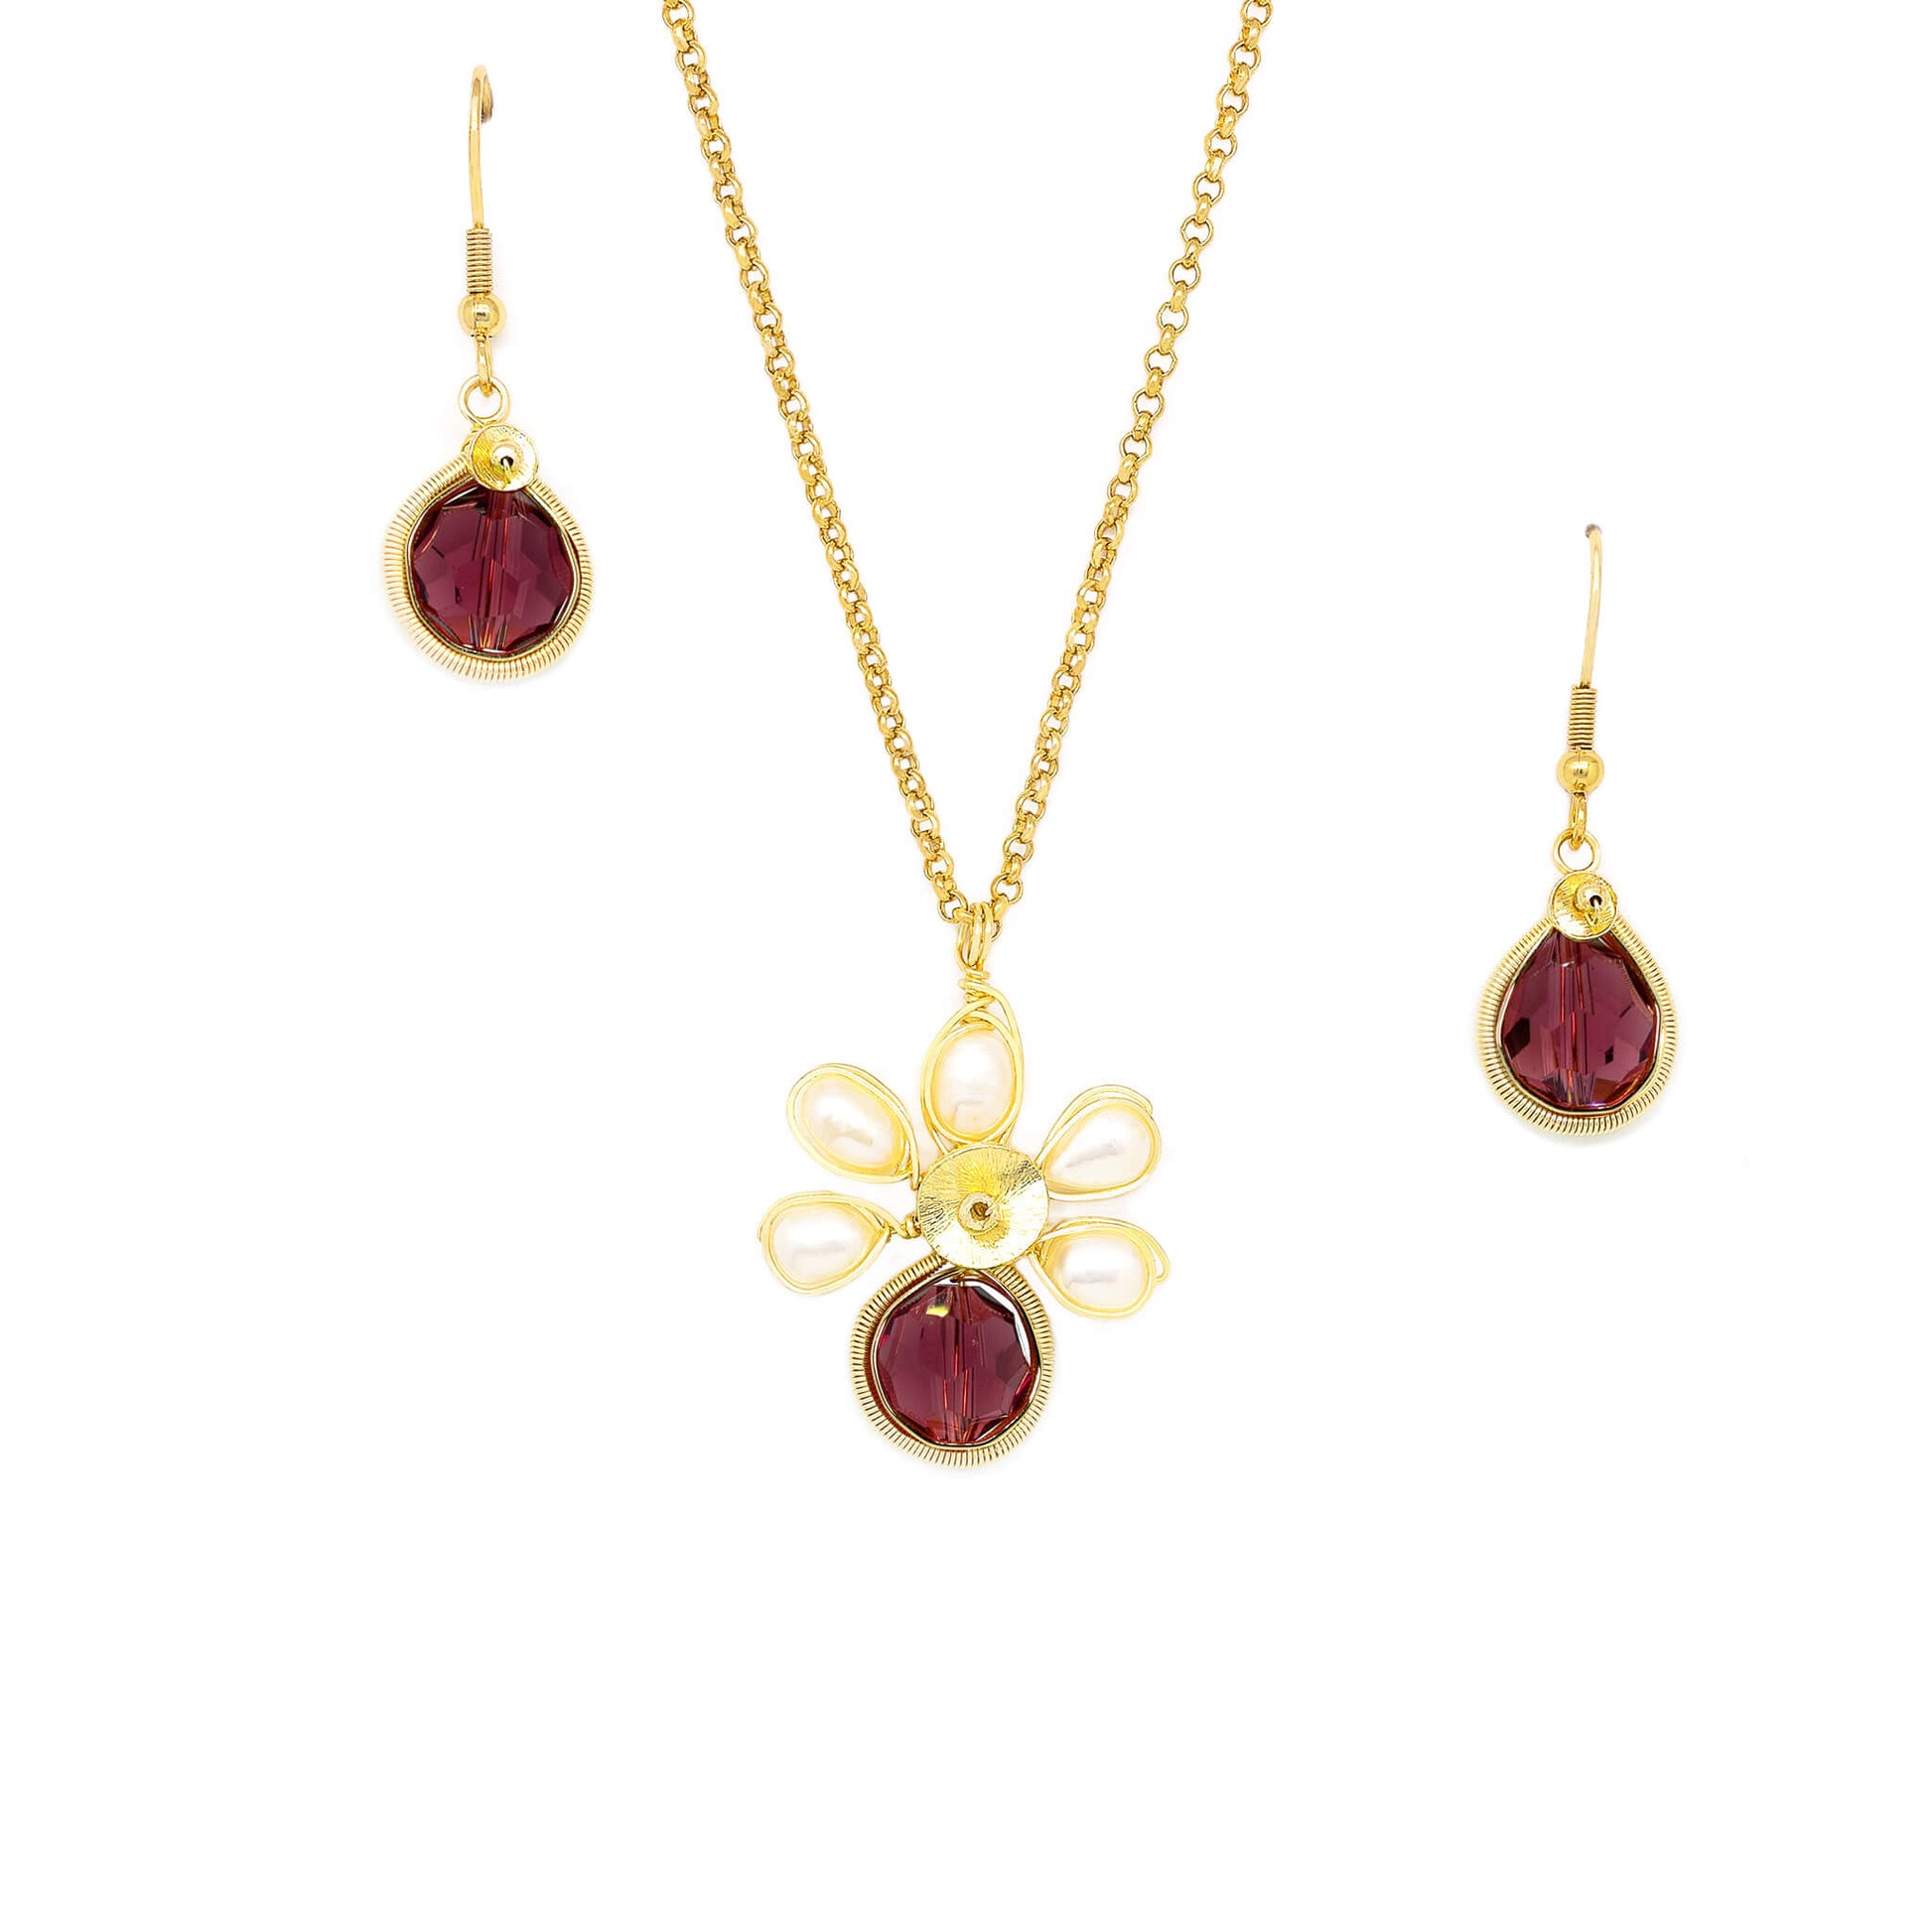 February Birthstone Crystal Necklace.-Earrings Set. Purple Crystals, Fresh Water Pearls  and Gold Set. 22K Gold Plated Chain. 